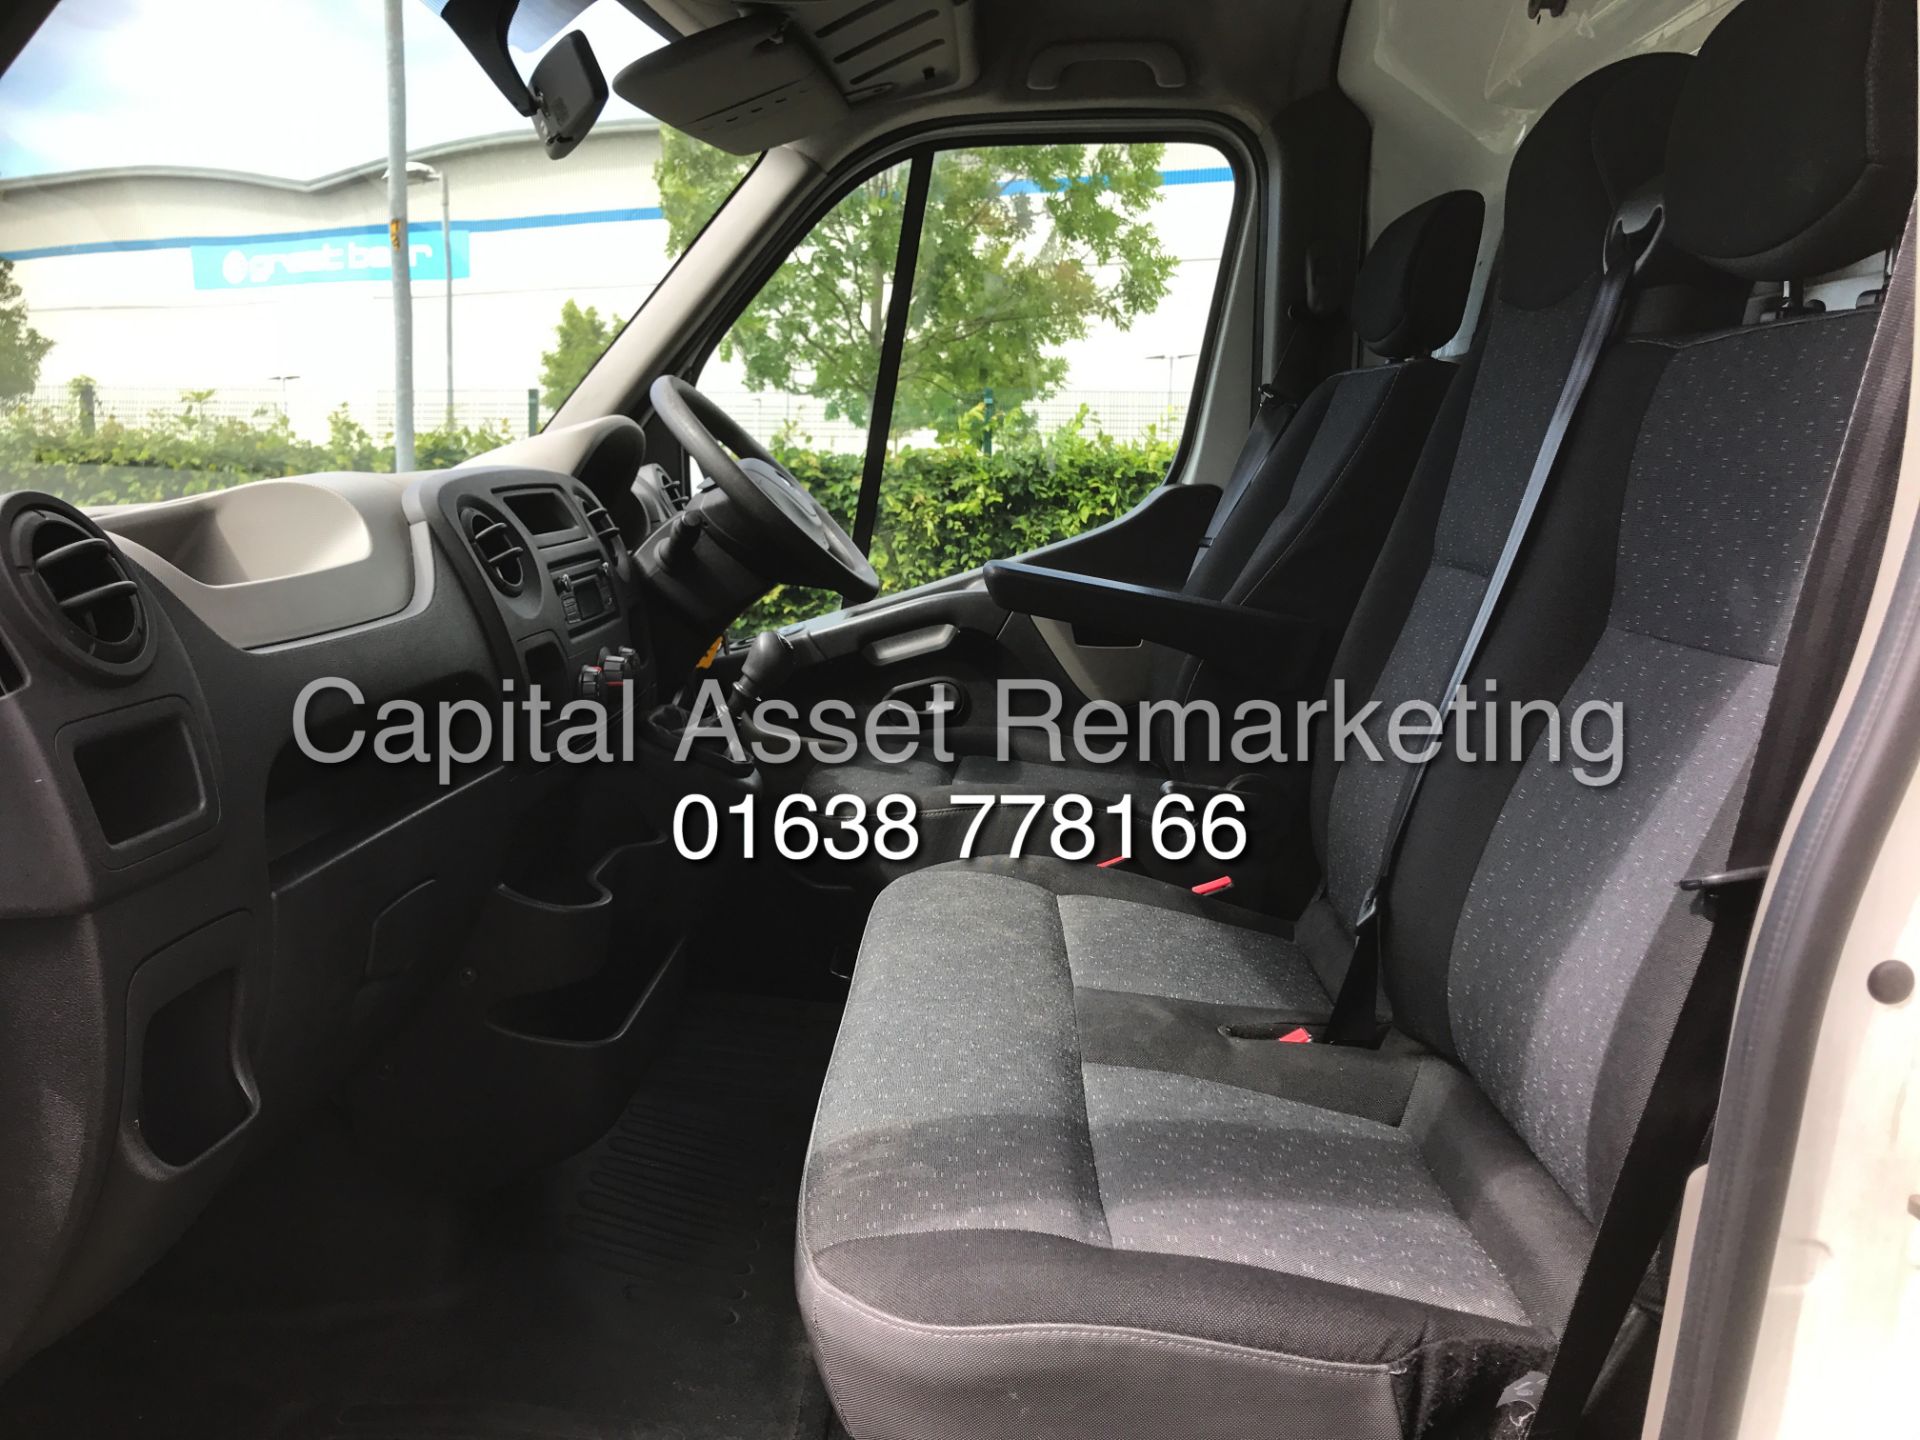 On Sale VAUXHALL MOVANO 2.3CDTI "125BHP-6 SPEED" 14FT LO-LOADER BODY IDEAL REMOVALS TRUCK (14 REG) - Image 12 of 15